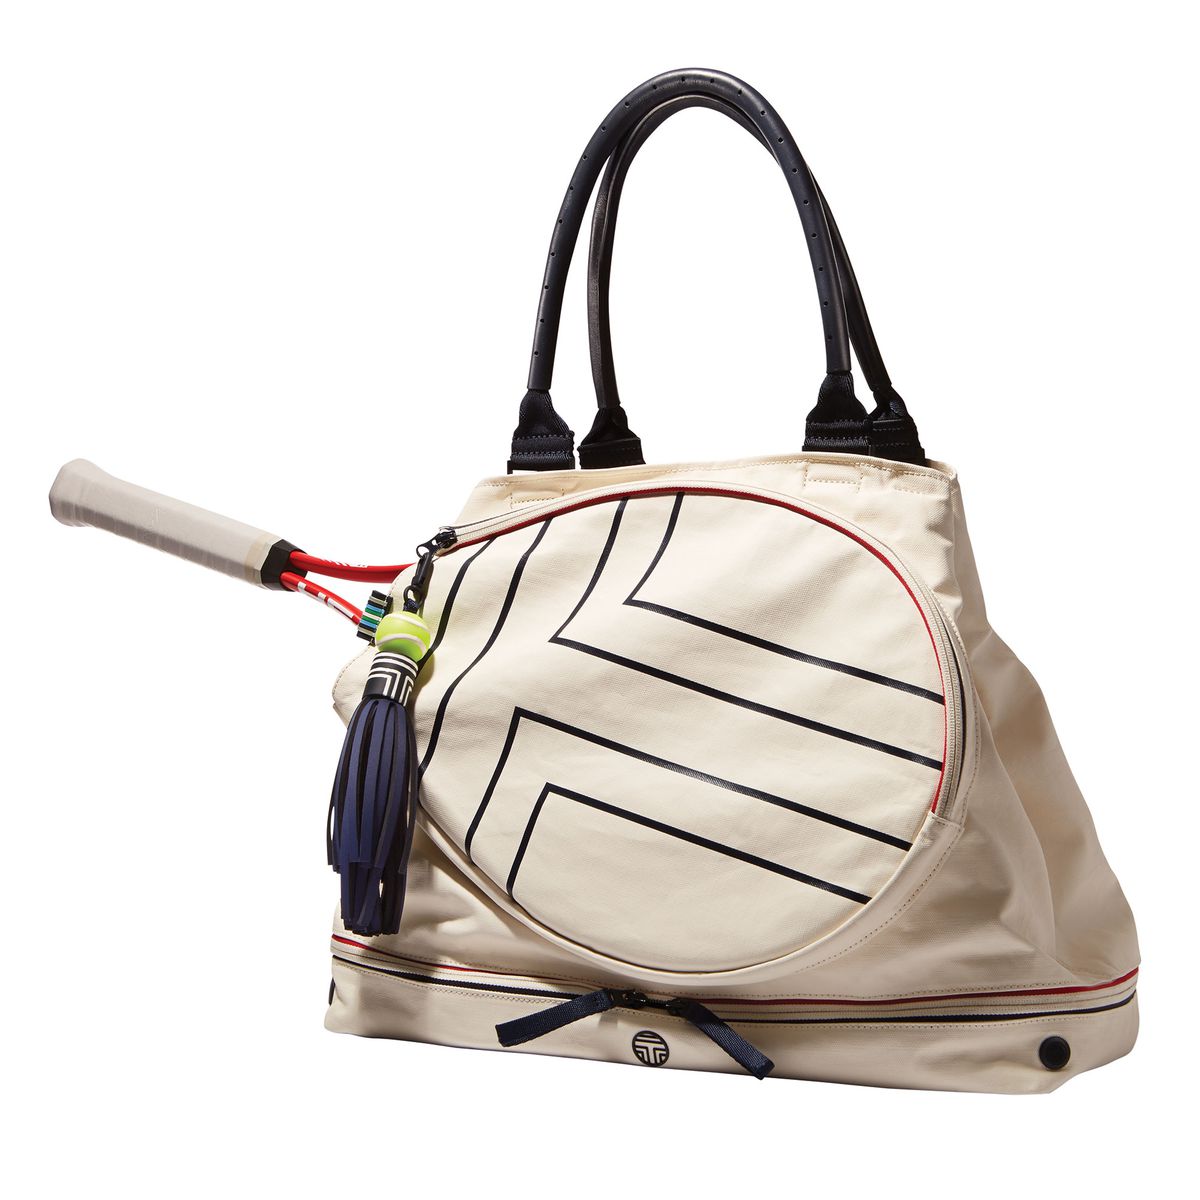 Tory Sport canvas tennis tote